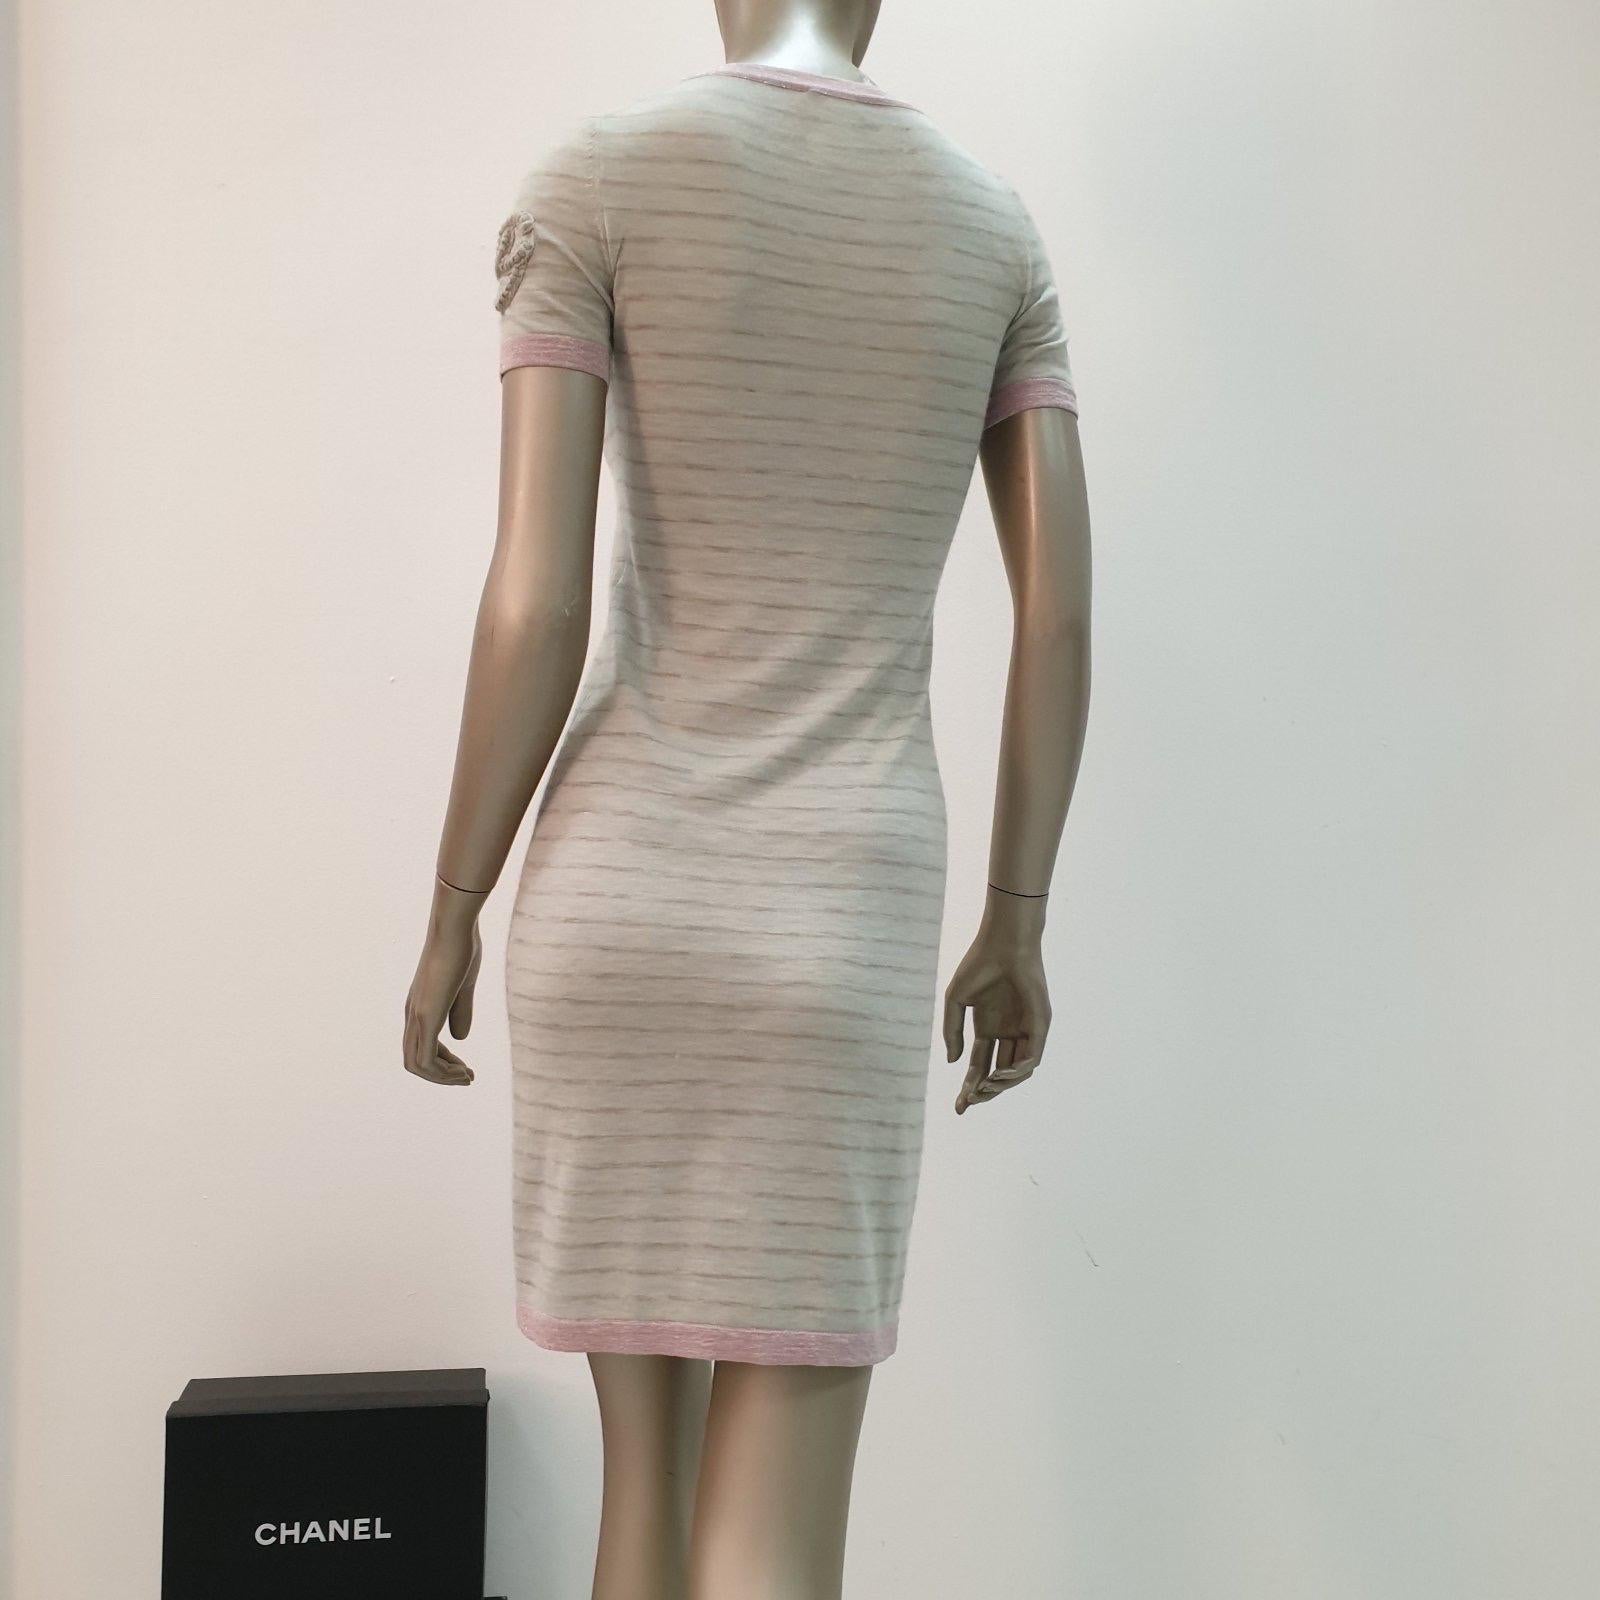 Chanel Striped Cashmere Knit Logo Embroidered Dress  In Good Condition For Sale In Krakow, PL